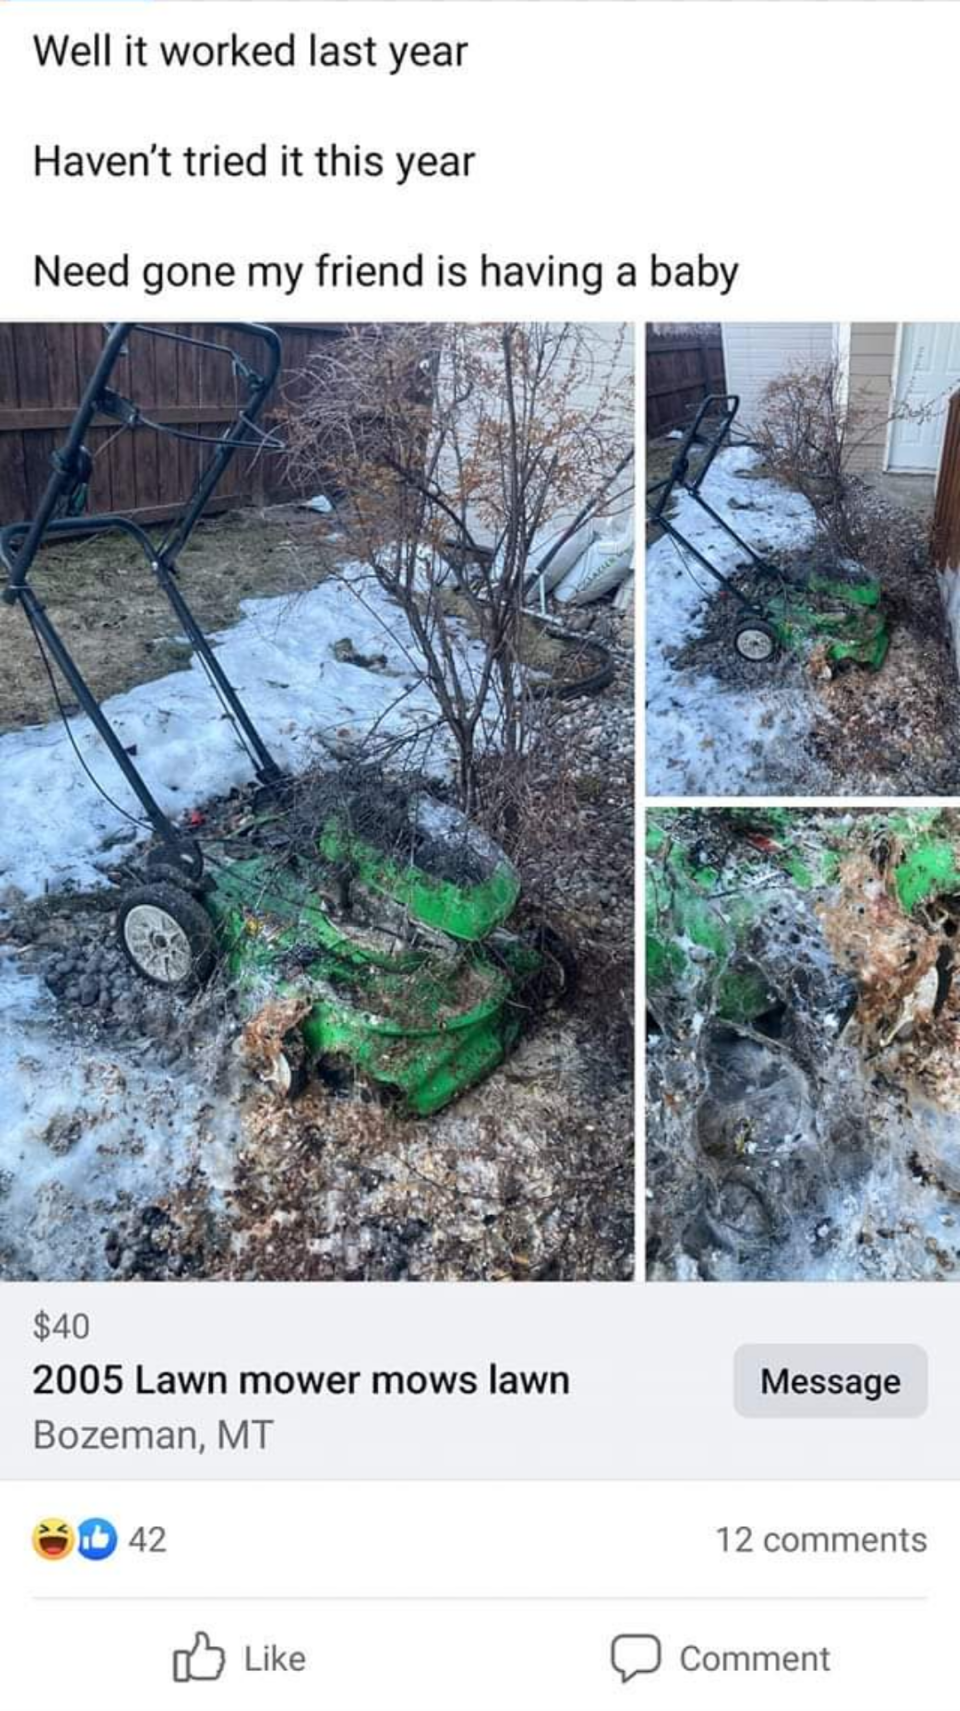 A lawn mower covered in grass rests in a snowy yard; caption jokes about not used this year due to a friend having a baby